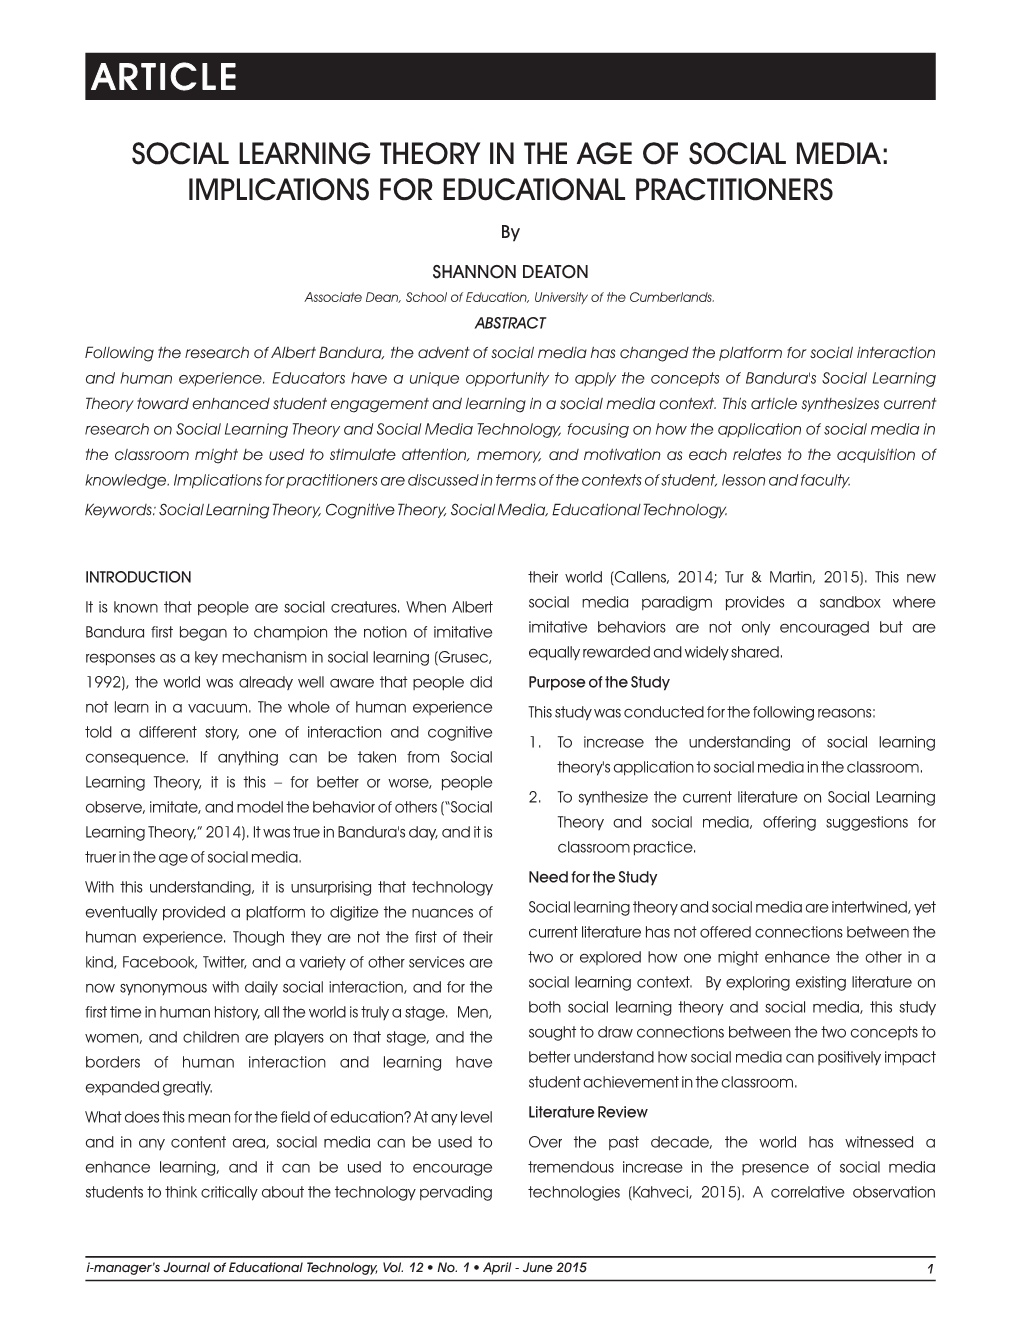 Social Learning Theory in the Age of Social Media: Implications for Educational Practitioners